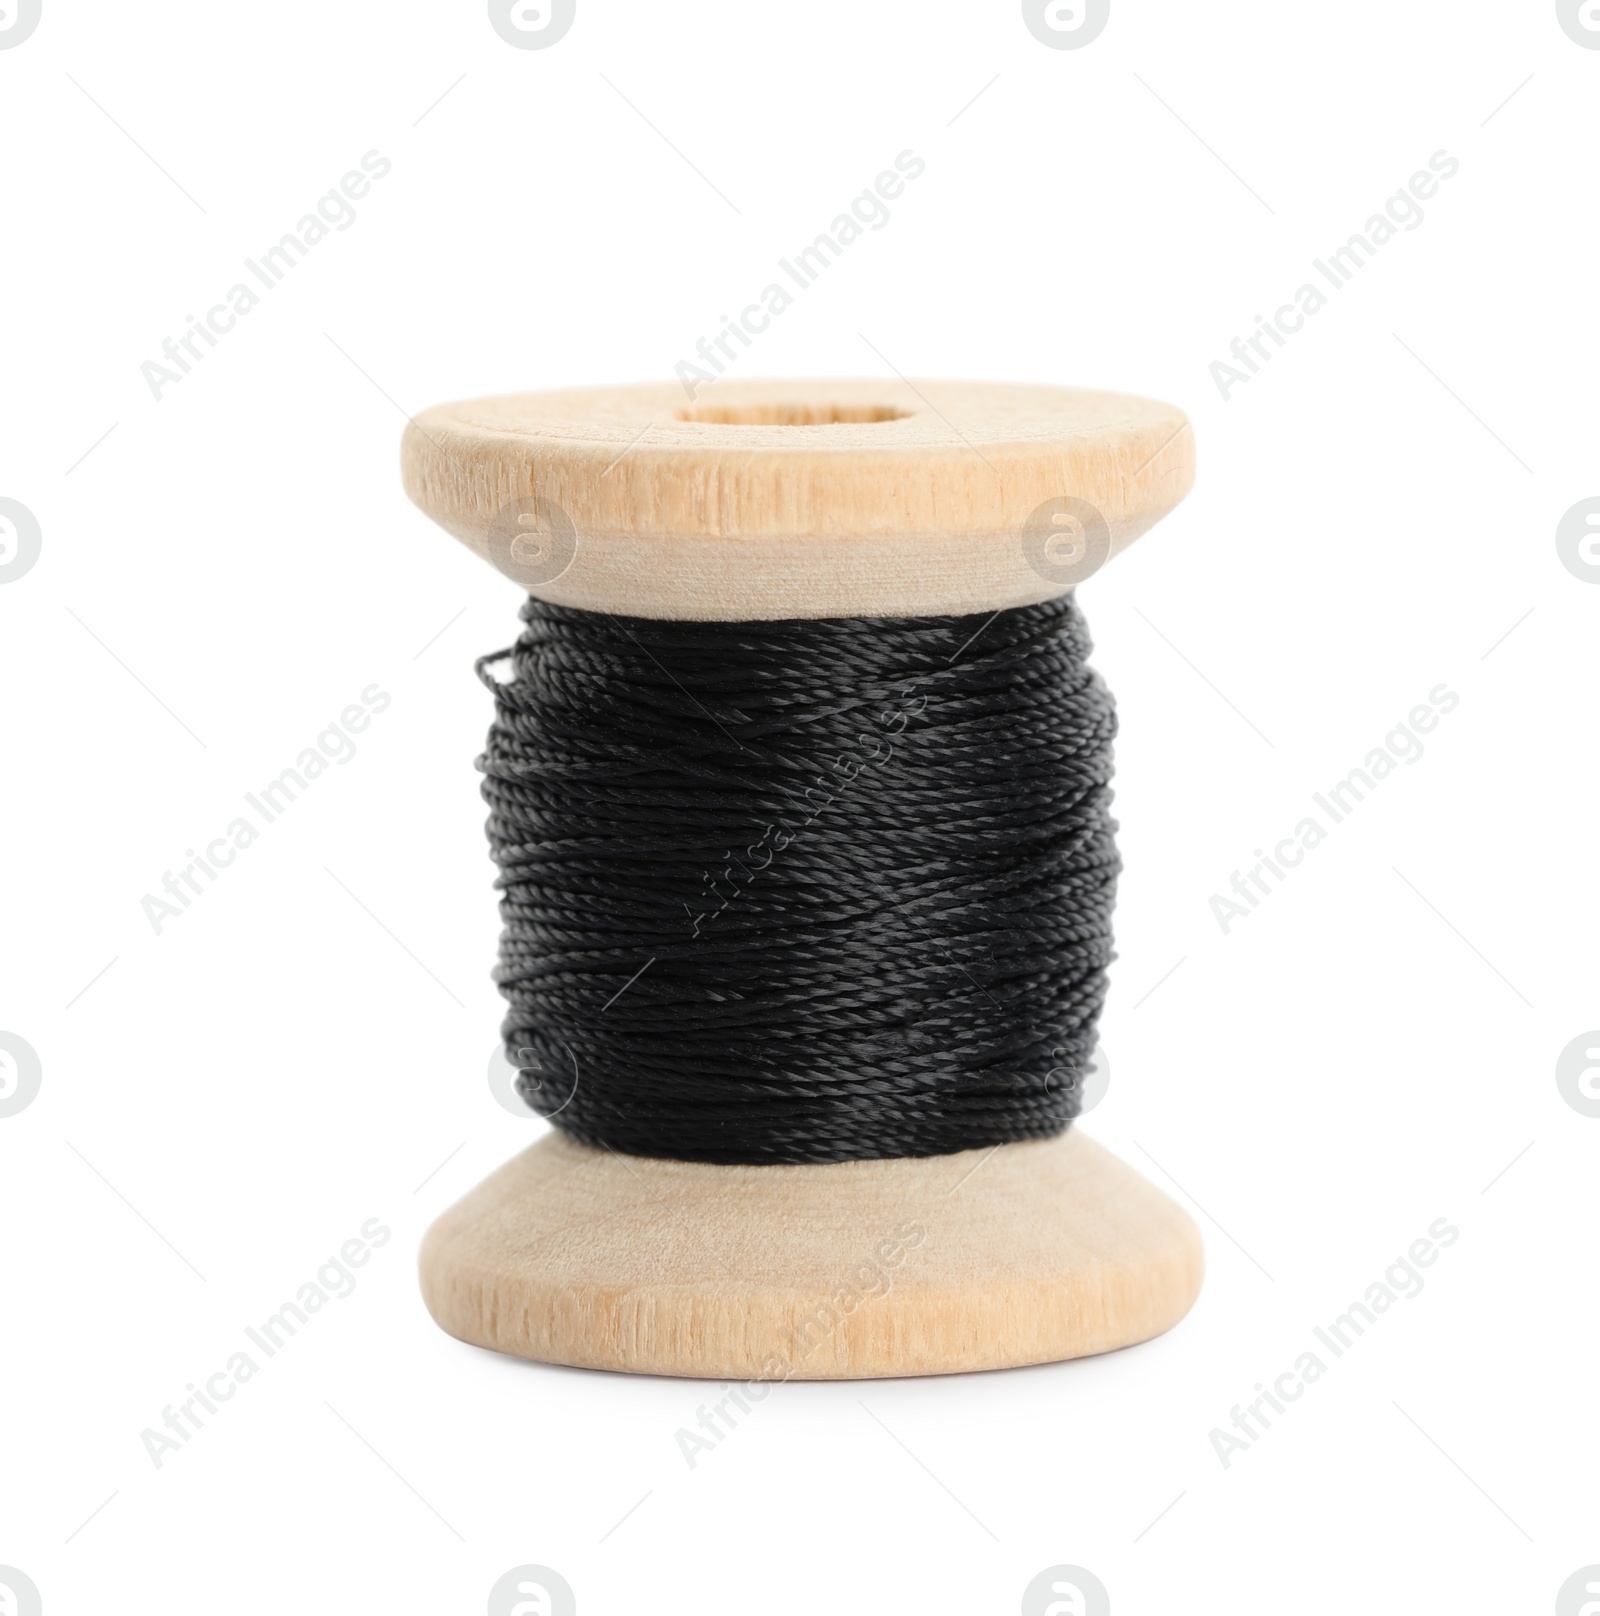 Photo of Wooden spool of black sewing thread isolated on white